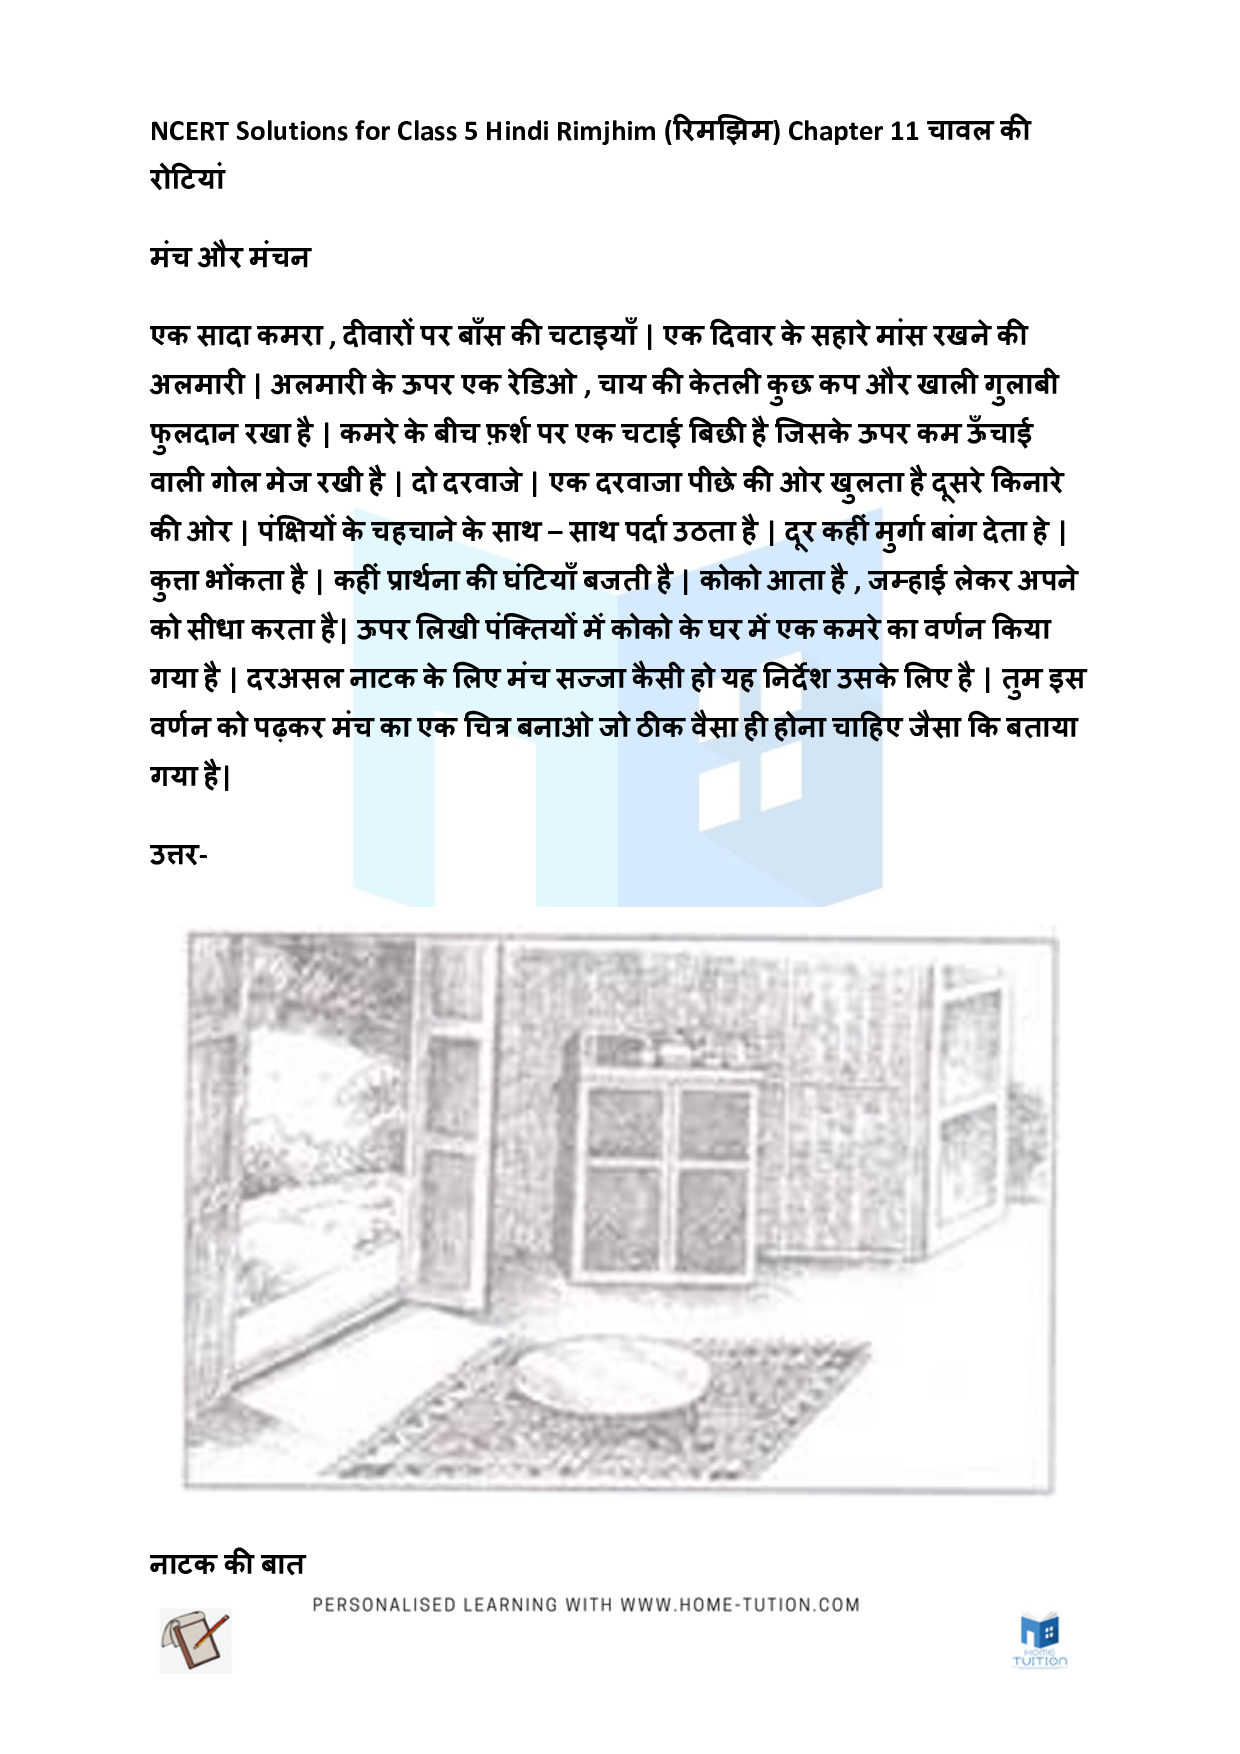 NCERT Solutions for Class 5 Hindi Rimjhim Chapter 11 चावल की रोटियां